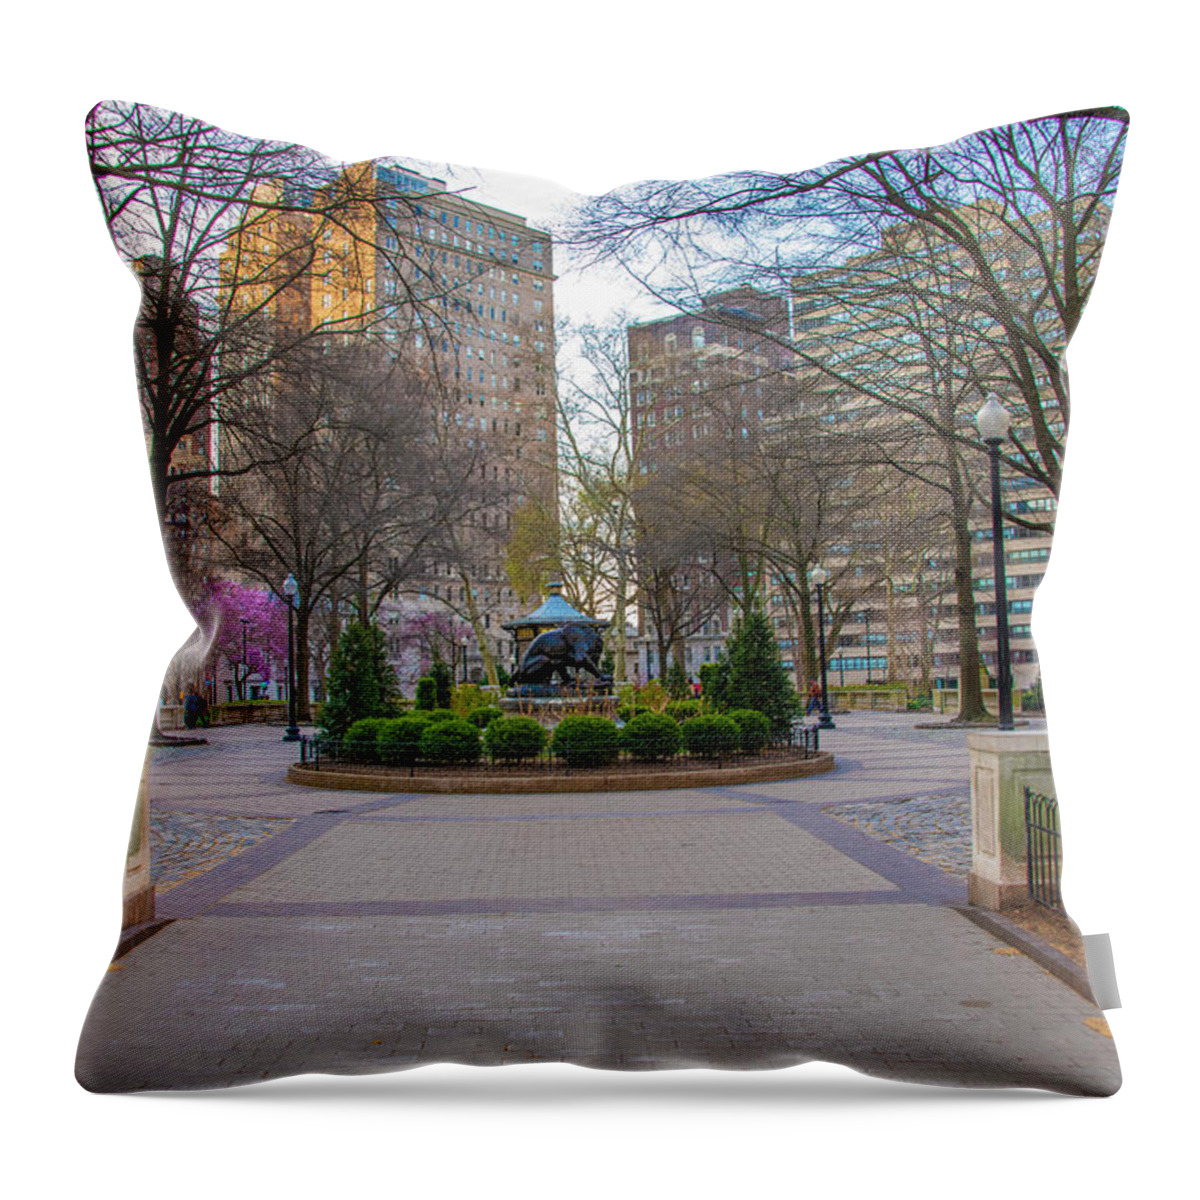 Early Throw Pillow featuring the photograph Early Spring Morning - Rittenhouse Square - Philadelphia by Bill Cannon